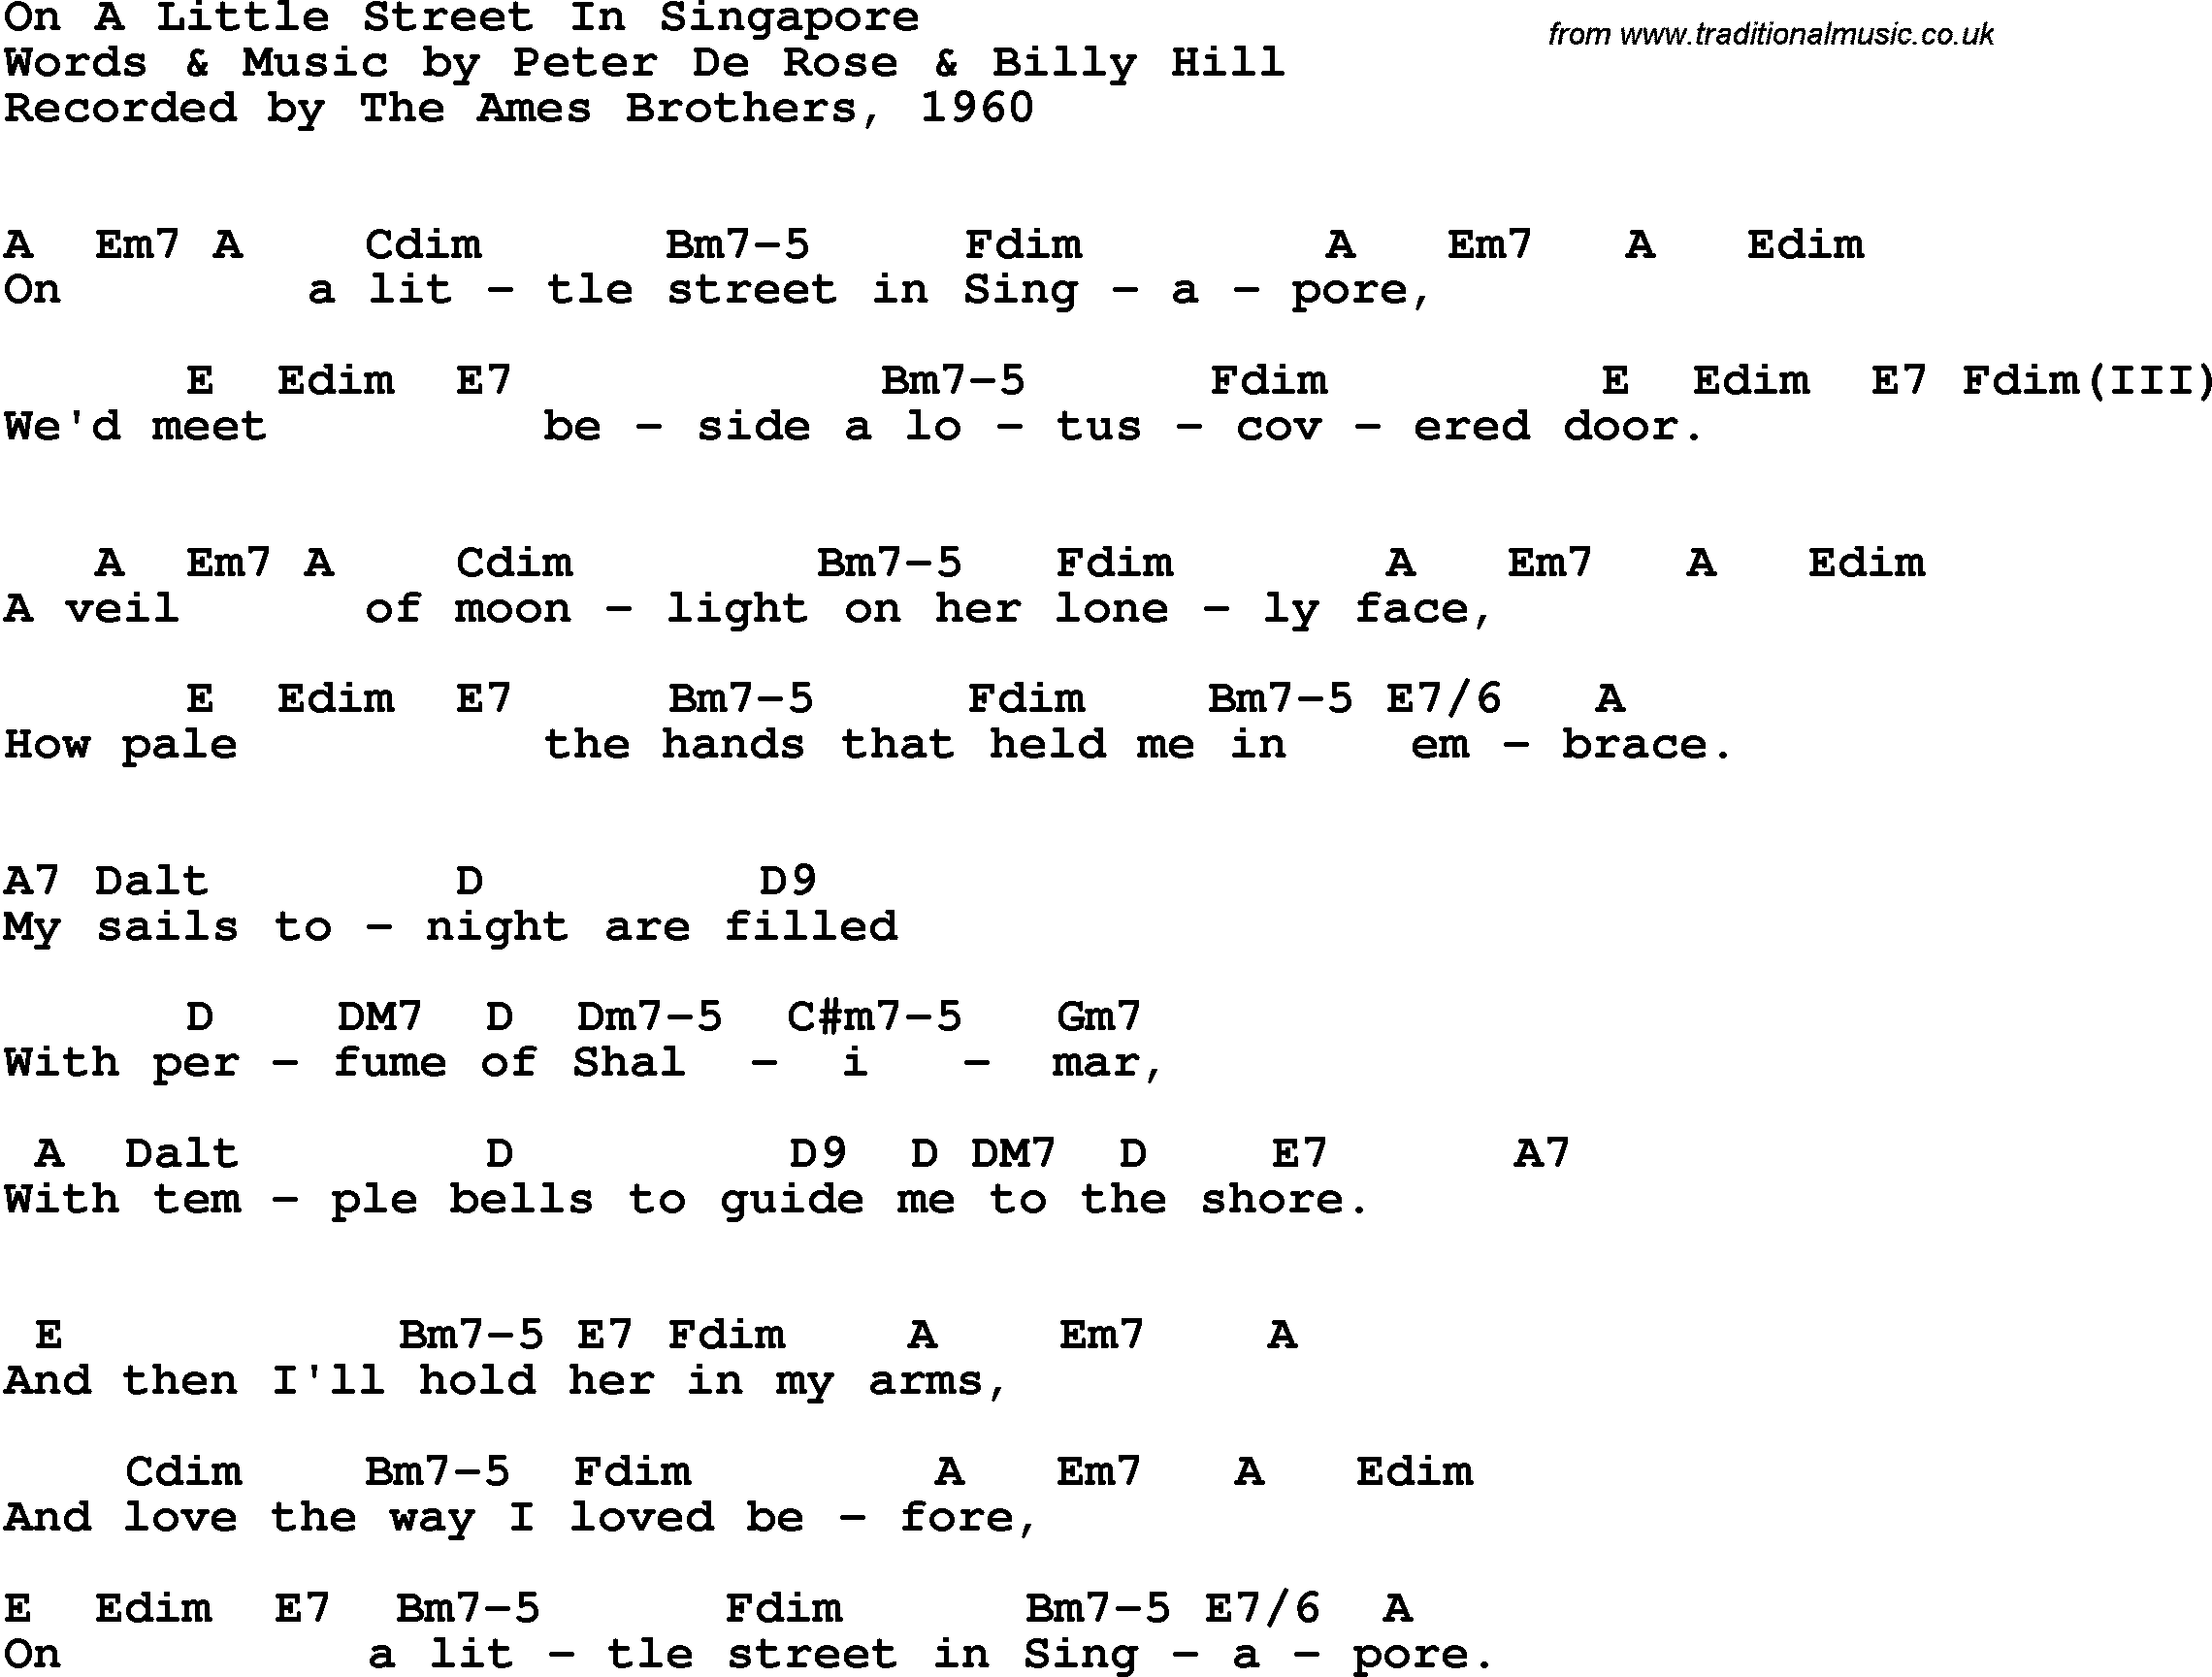 Song Lyrics with guitar chords for On A Little Street In Singapore - The Ames Brothers, 1960